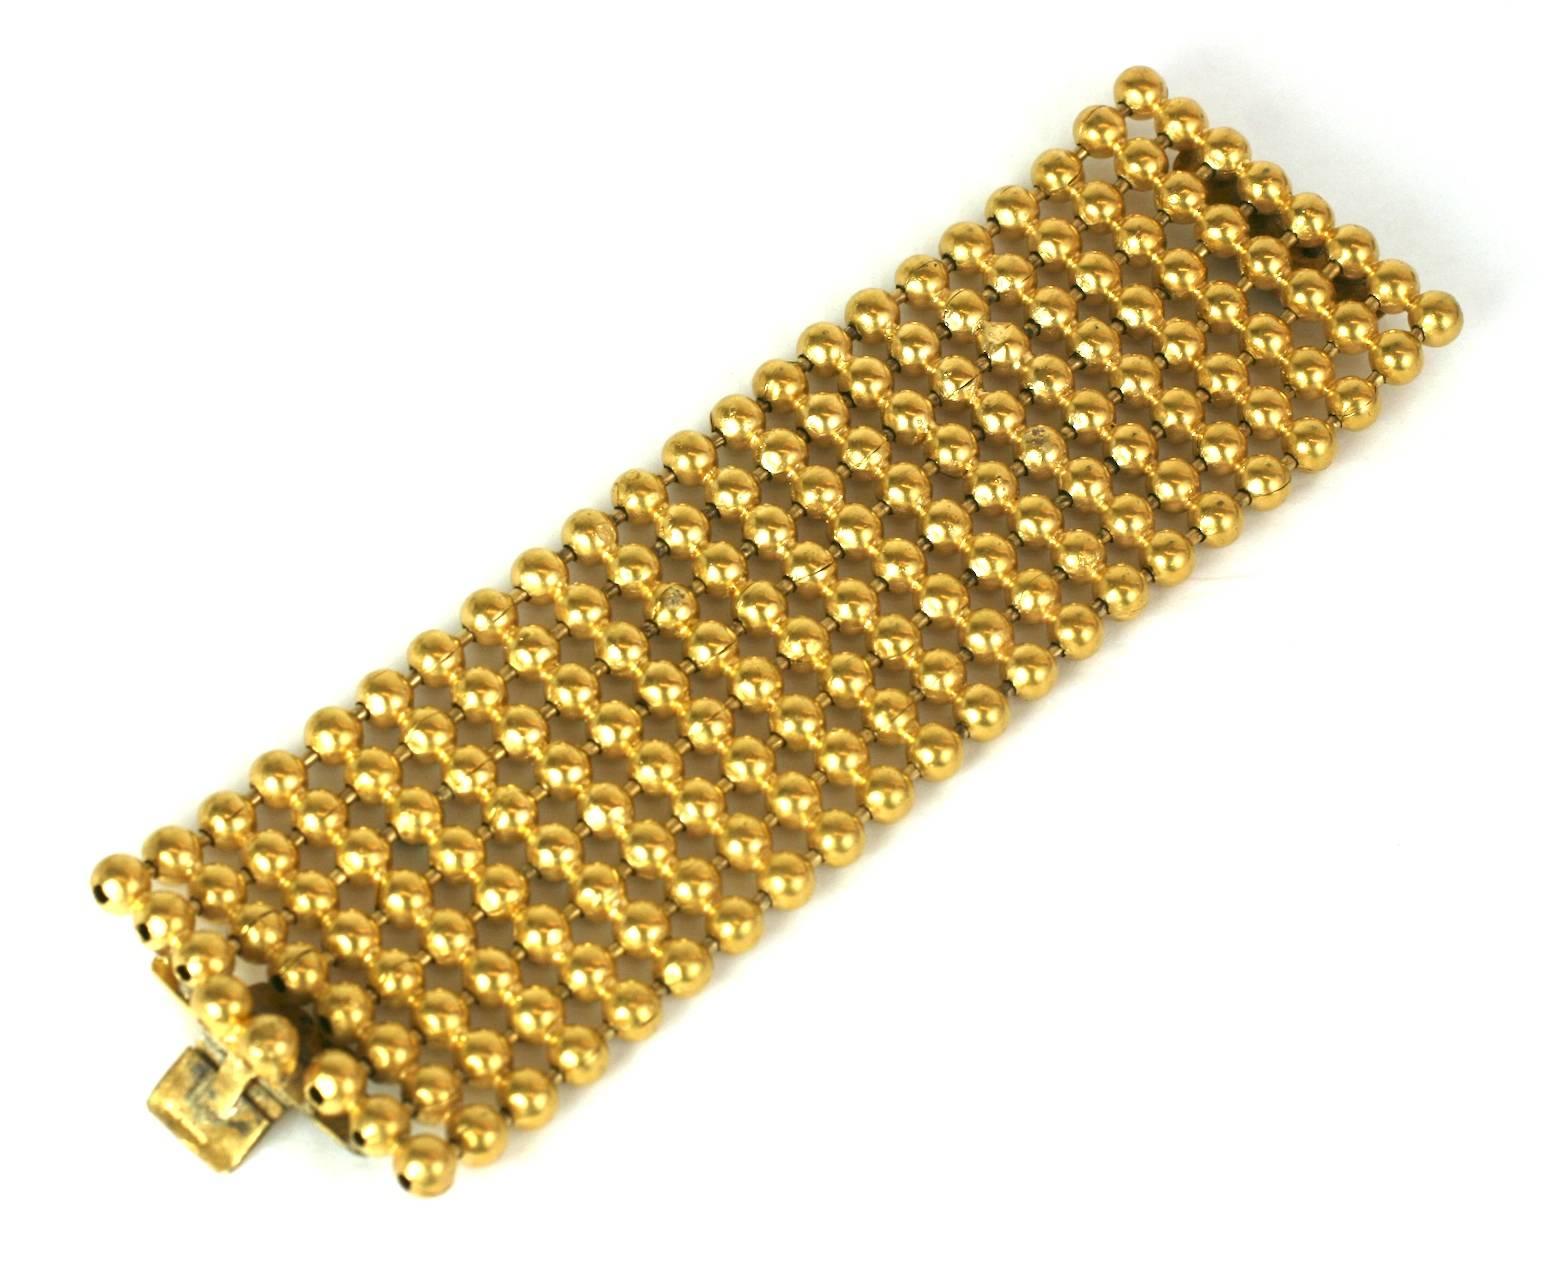 Striking French bright gilt ball chain wide cuff bracelet. Marked France.
Excellent Condition. 1980's France. 
Length 7 3/8